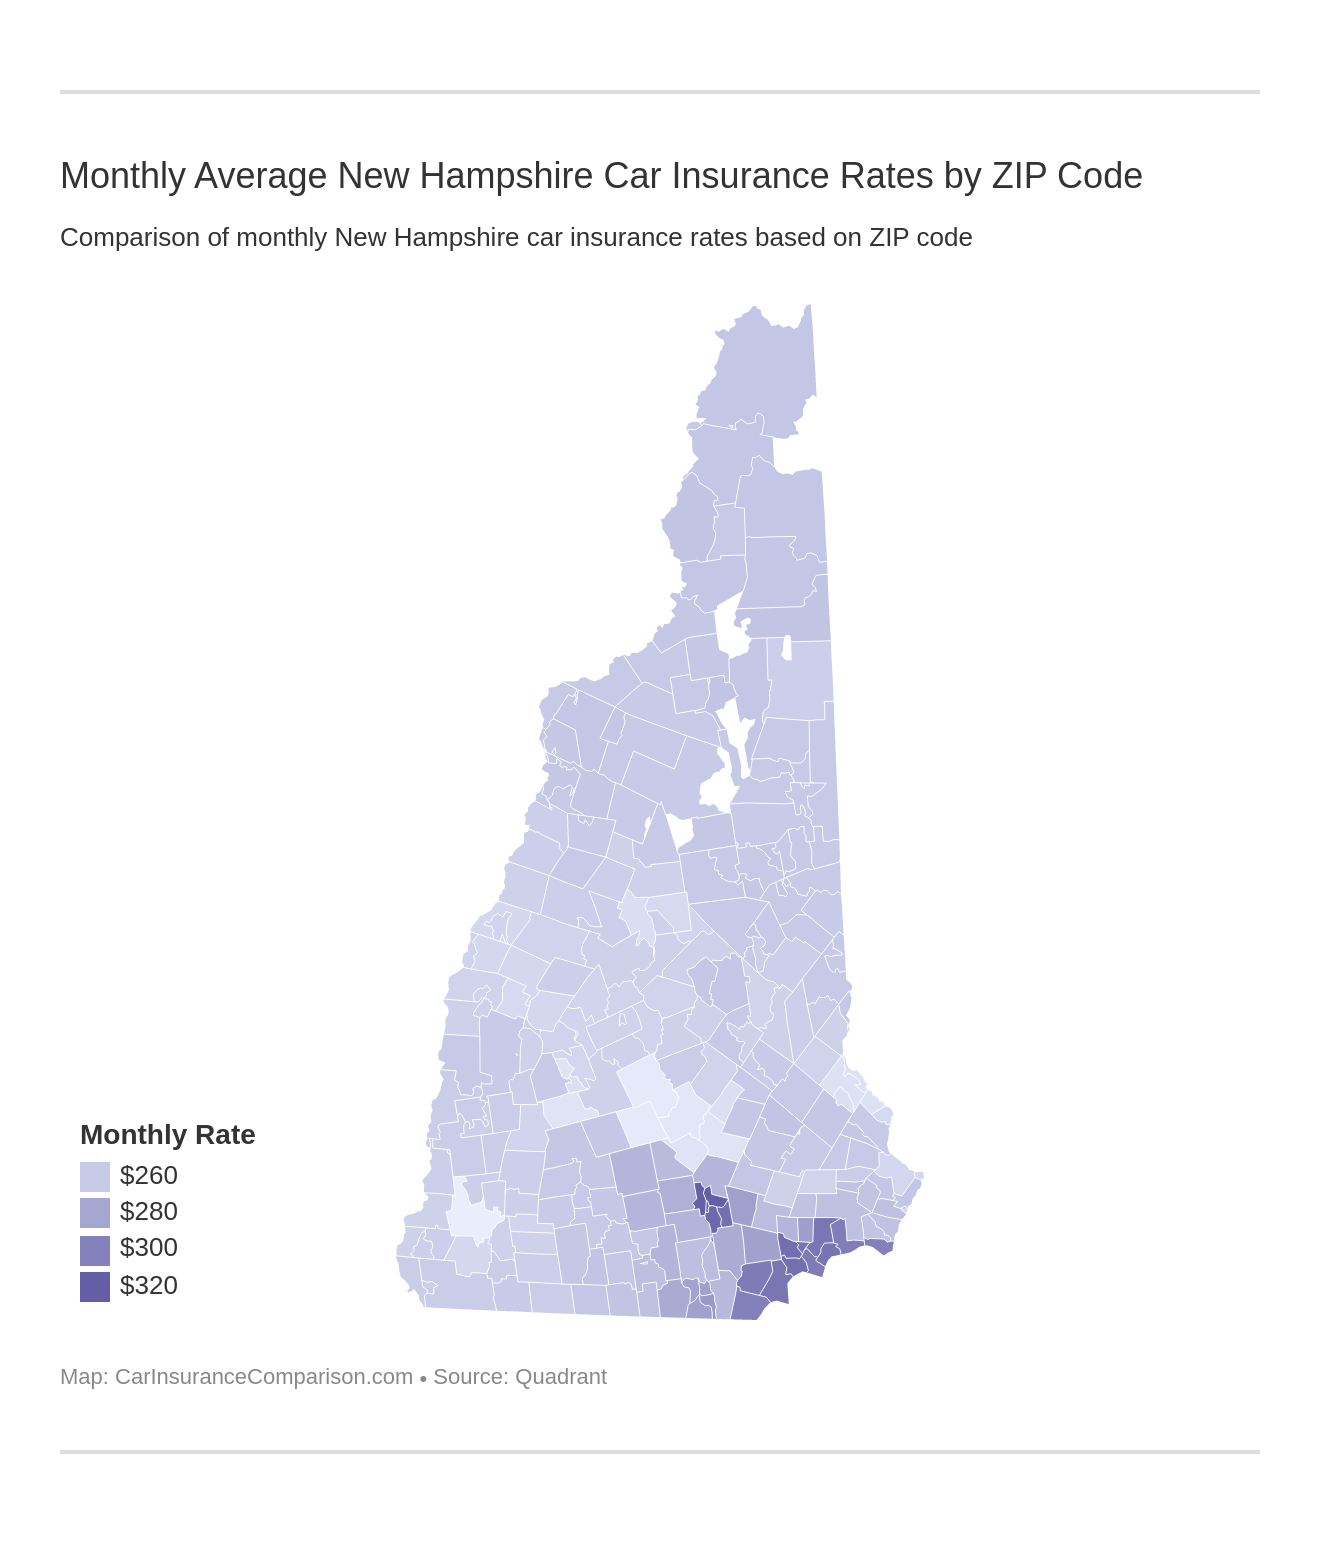 Monthly Average New Hampshire Car Insurance Rates by ZIP Code